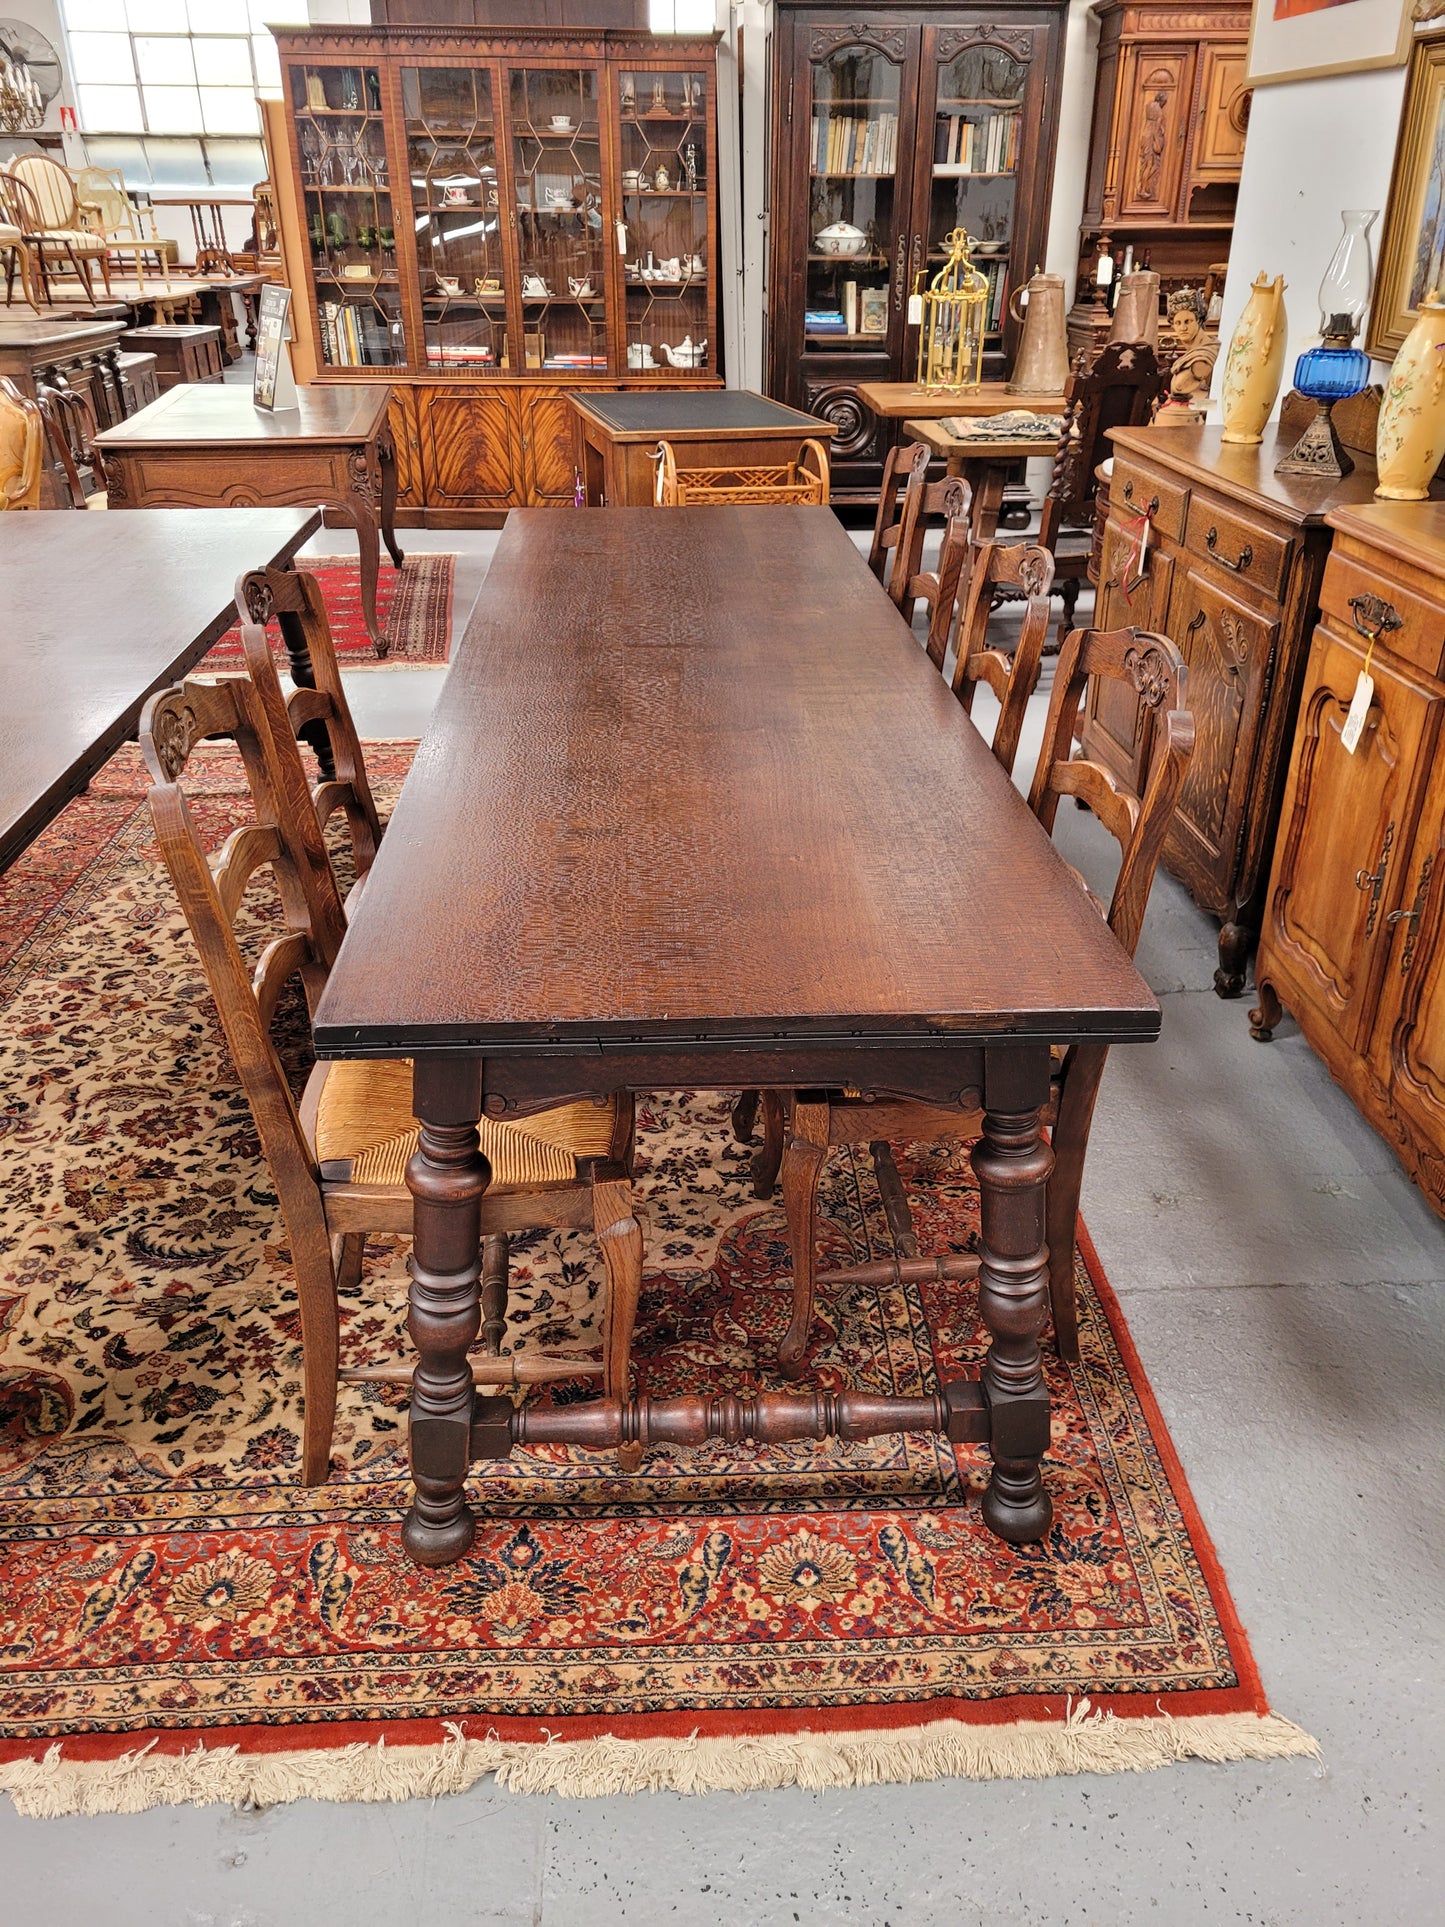 An Australian Silky Oak Spanish style refectory dining table measuring 274.5 cm in length. It can comfortable sit 8-10 people and is a very hard to find size. It is in good original detailed condition.